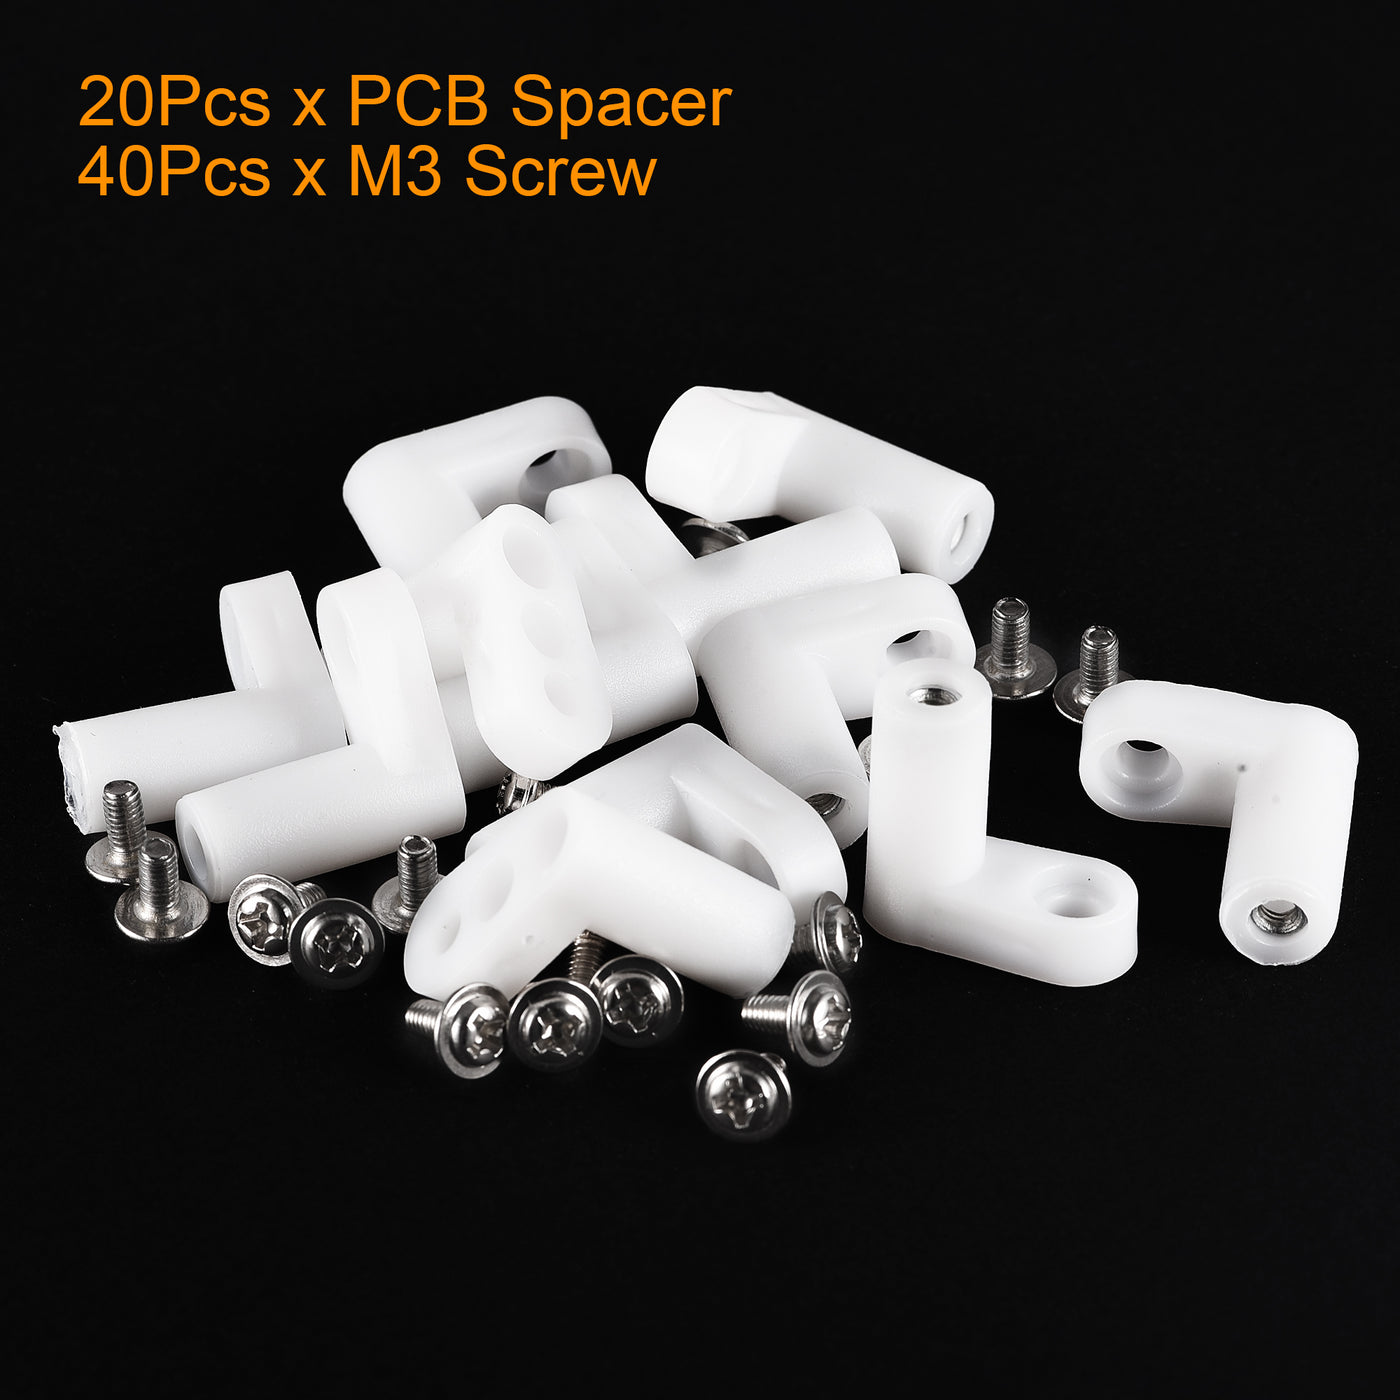 uxcell Uxcell 20Pcs Circuit Board PCB Spacers L Shape Insulated Plastic Fixed Mounting Feet White 0.8'' Supporting Height with M3 Screw